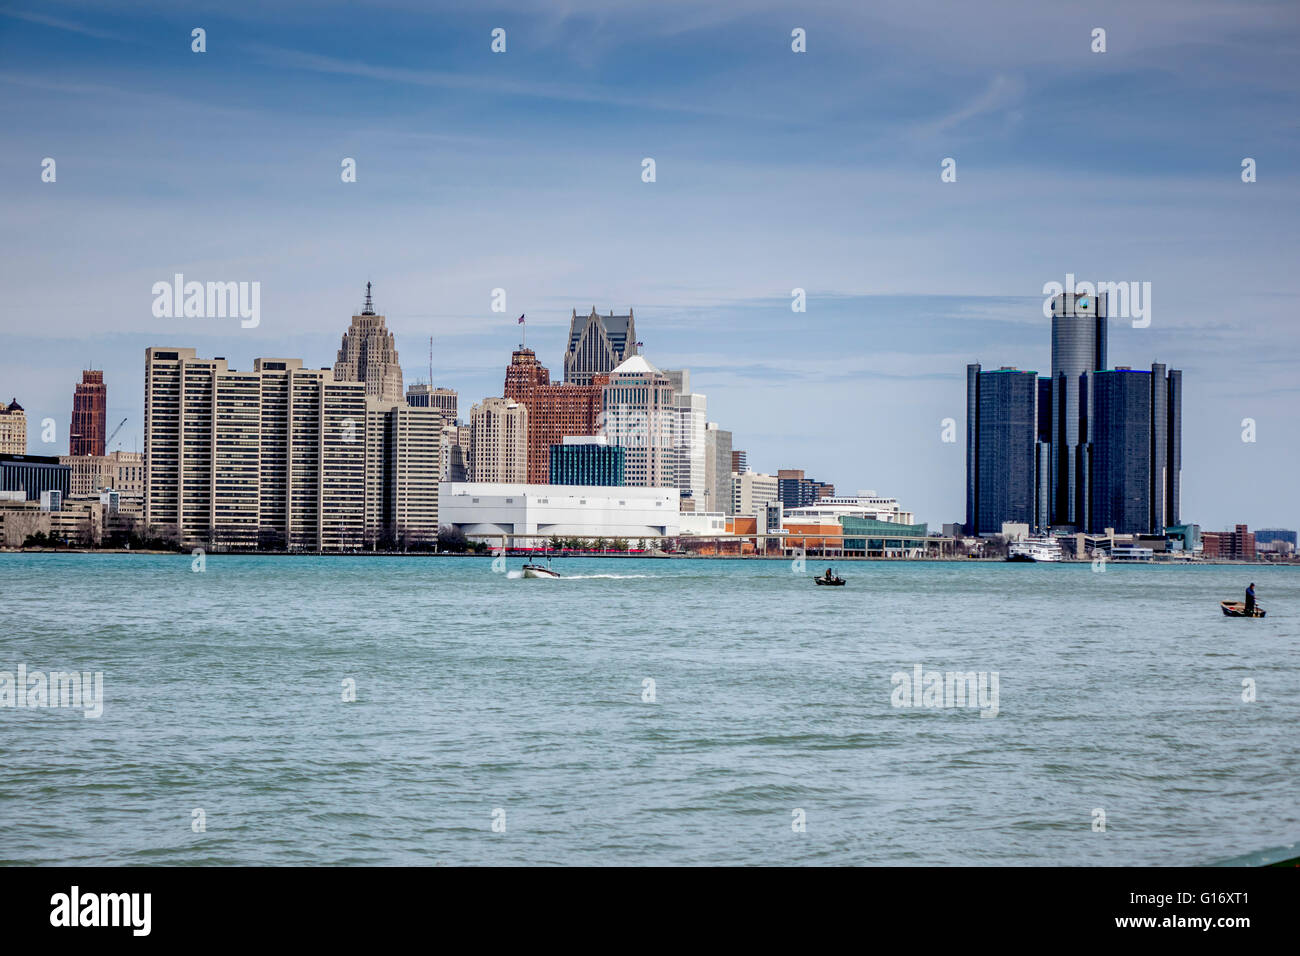 The Detroit City Downtown Skyline Seen From Windsor Canada Across The Detroit River Stock Photo